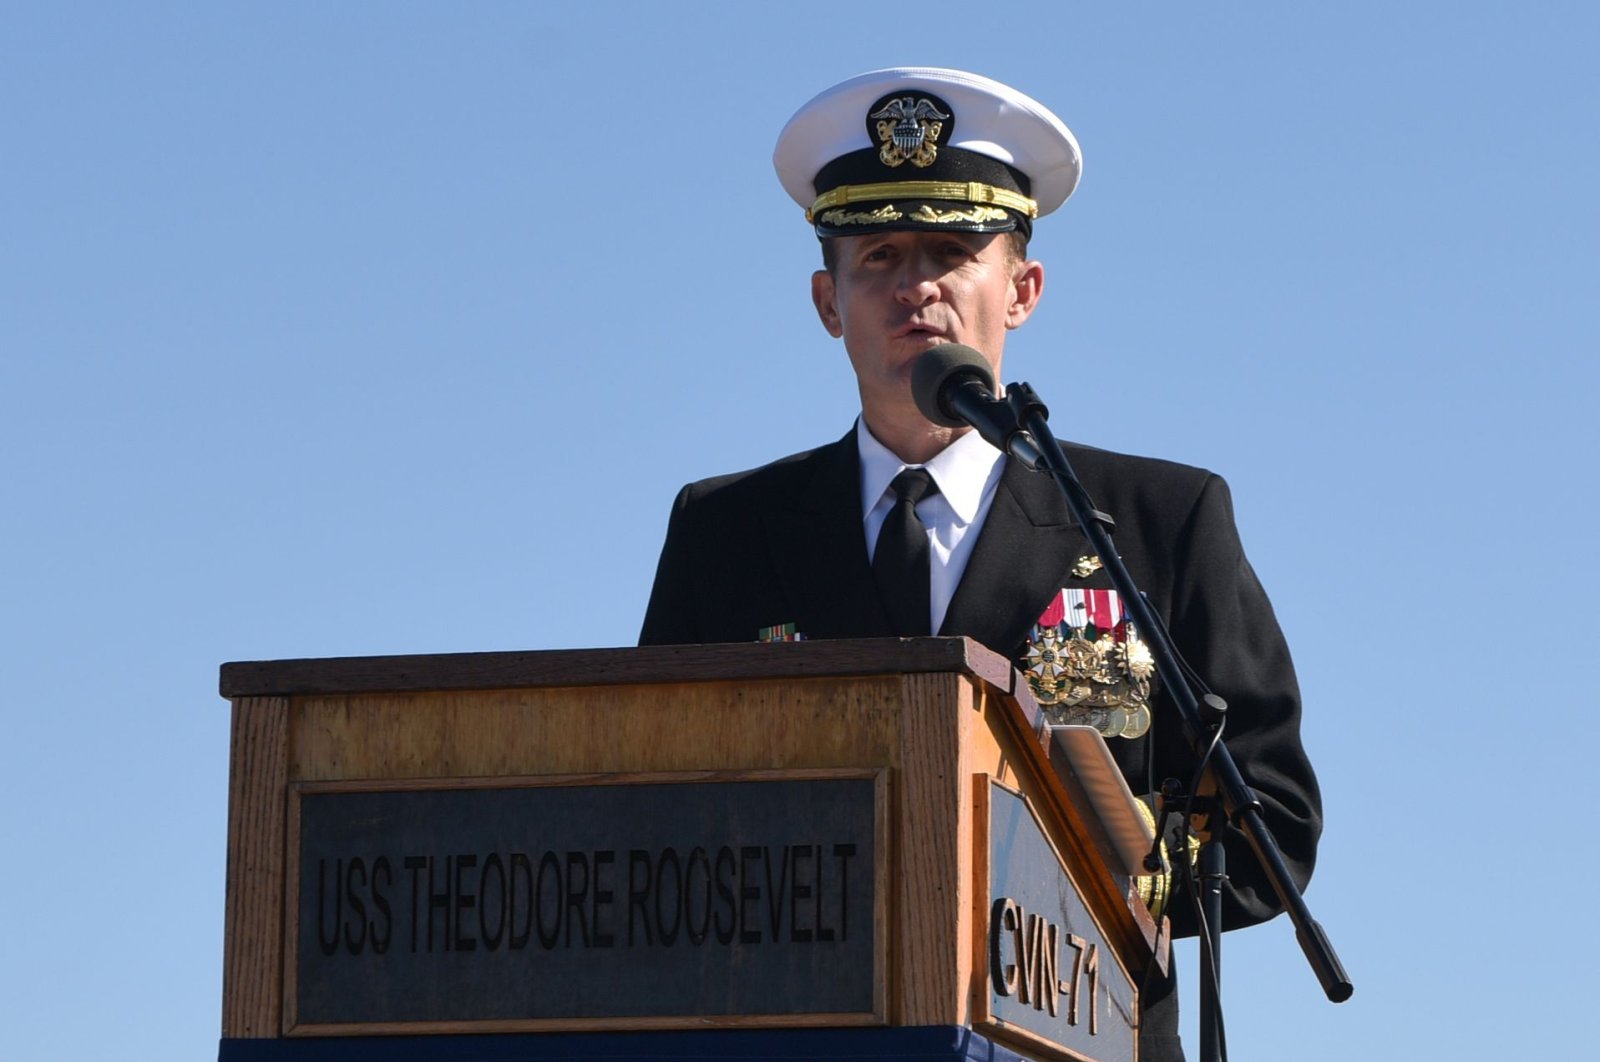 This handout photo released by the U.S. Navy shows Capt. Brett Crozier addressing the crew for the first time as commanding officer of the aircraft carrier USS Theodore Roosevelt (CVN 71) during a change of command ceremony on the ship’s flight deck in San Diego, California, Nov. 1, 2019. (AFP Photo)